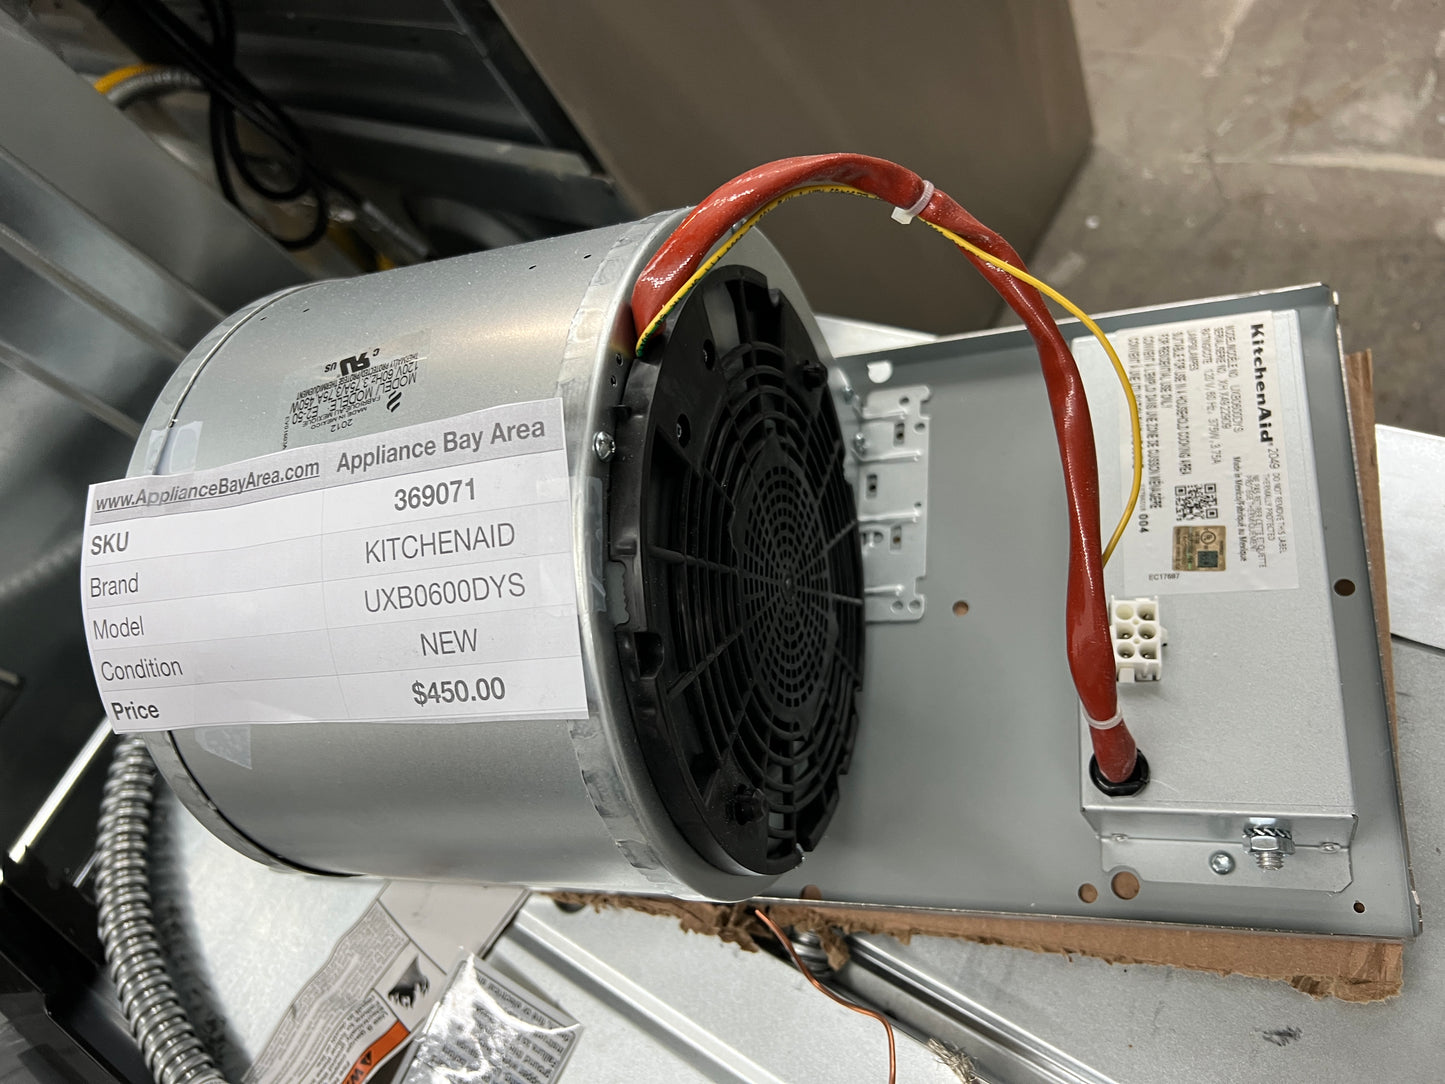 Kitchenaid 600 CFM internal Blower Motor UXB0600DYS Silver Stainless Steel for Commercial Ventilation Hoods,NEW,369071